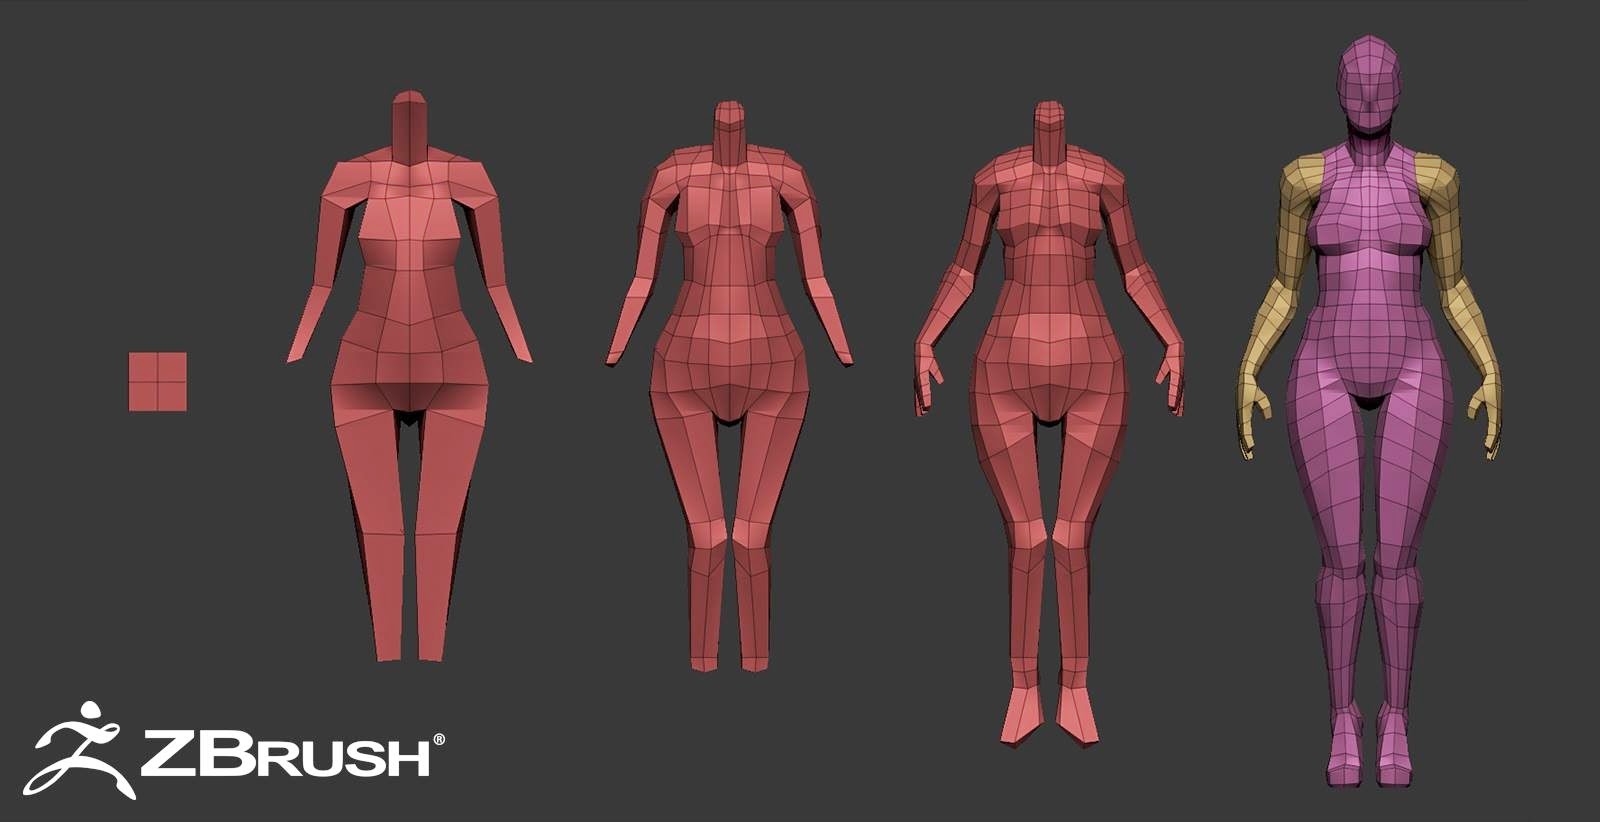 zbrush 4r7 how to scale in only one axis